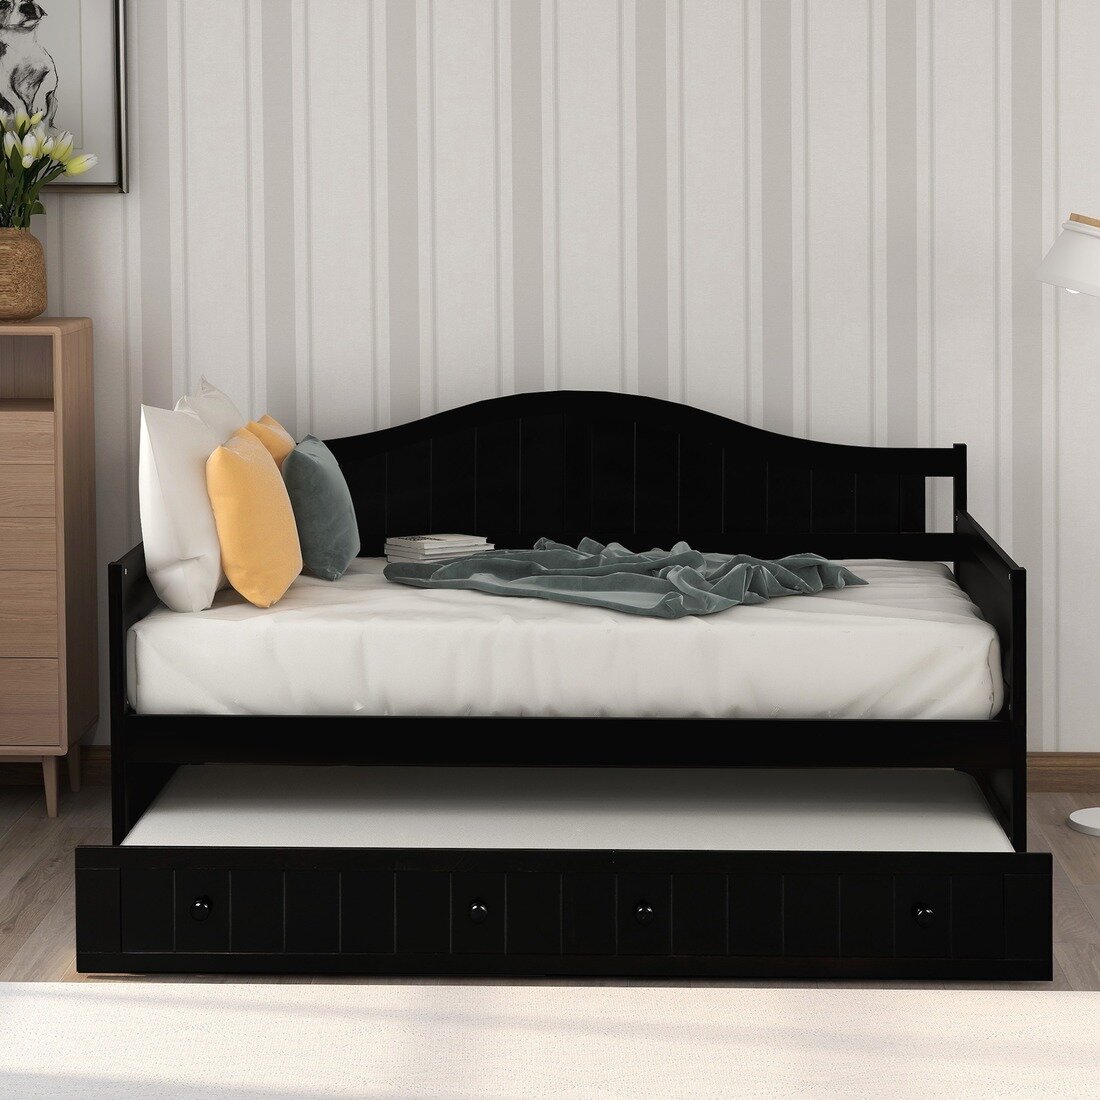 Details about   Wood Twin Platform Bed Frame w/ Wheels Trundle Bedroom Furniture White Gray US 